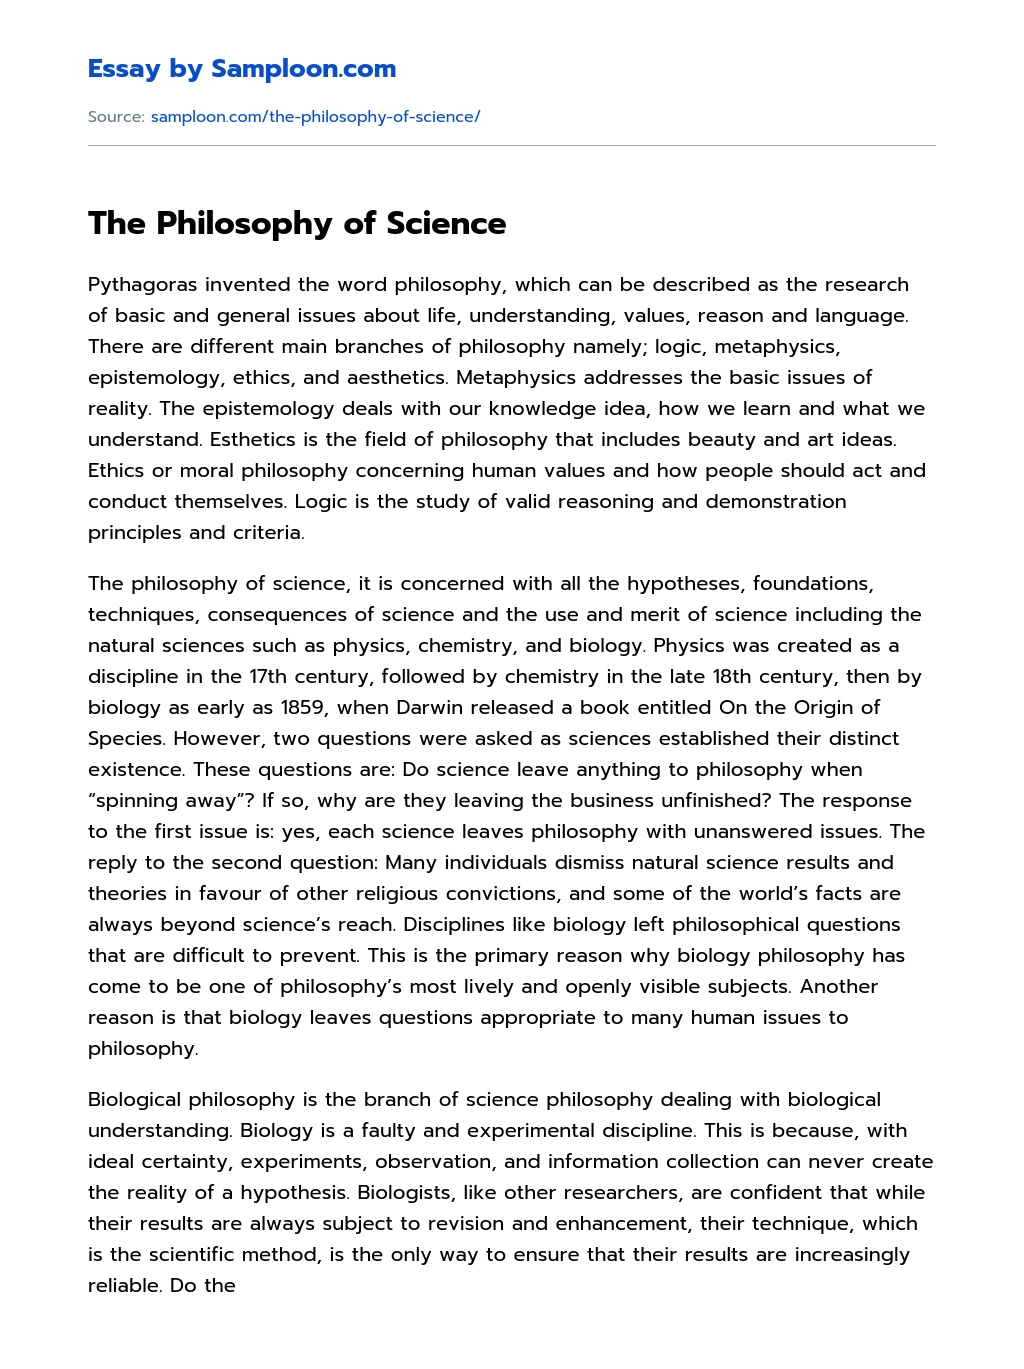 The Philosophy of Science essay